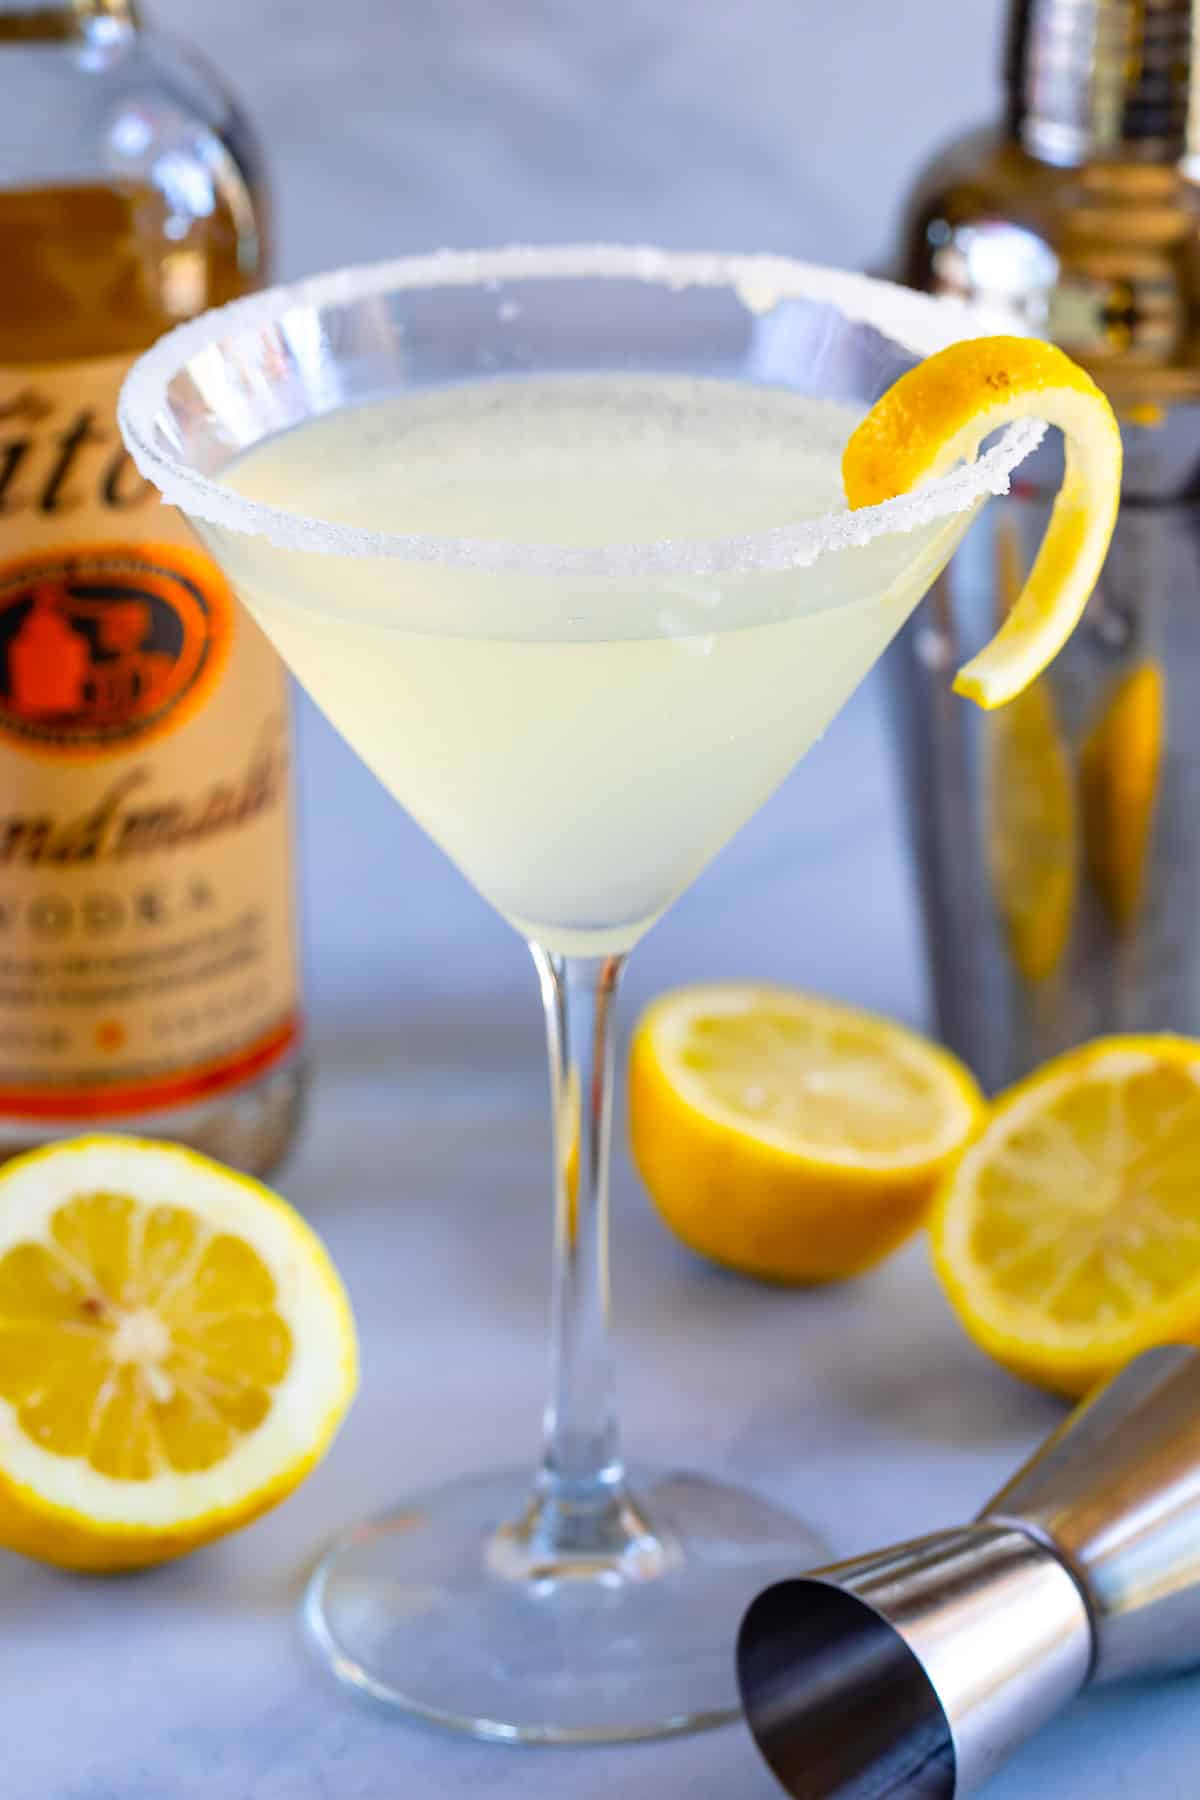 lemon drink in martini glass with shaker behind